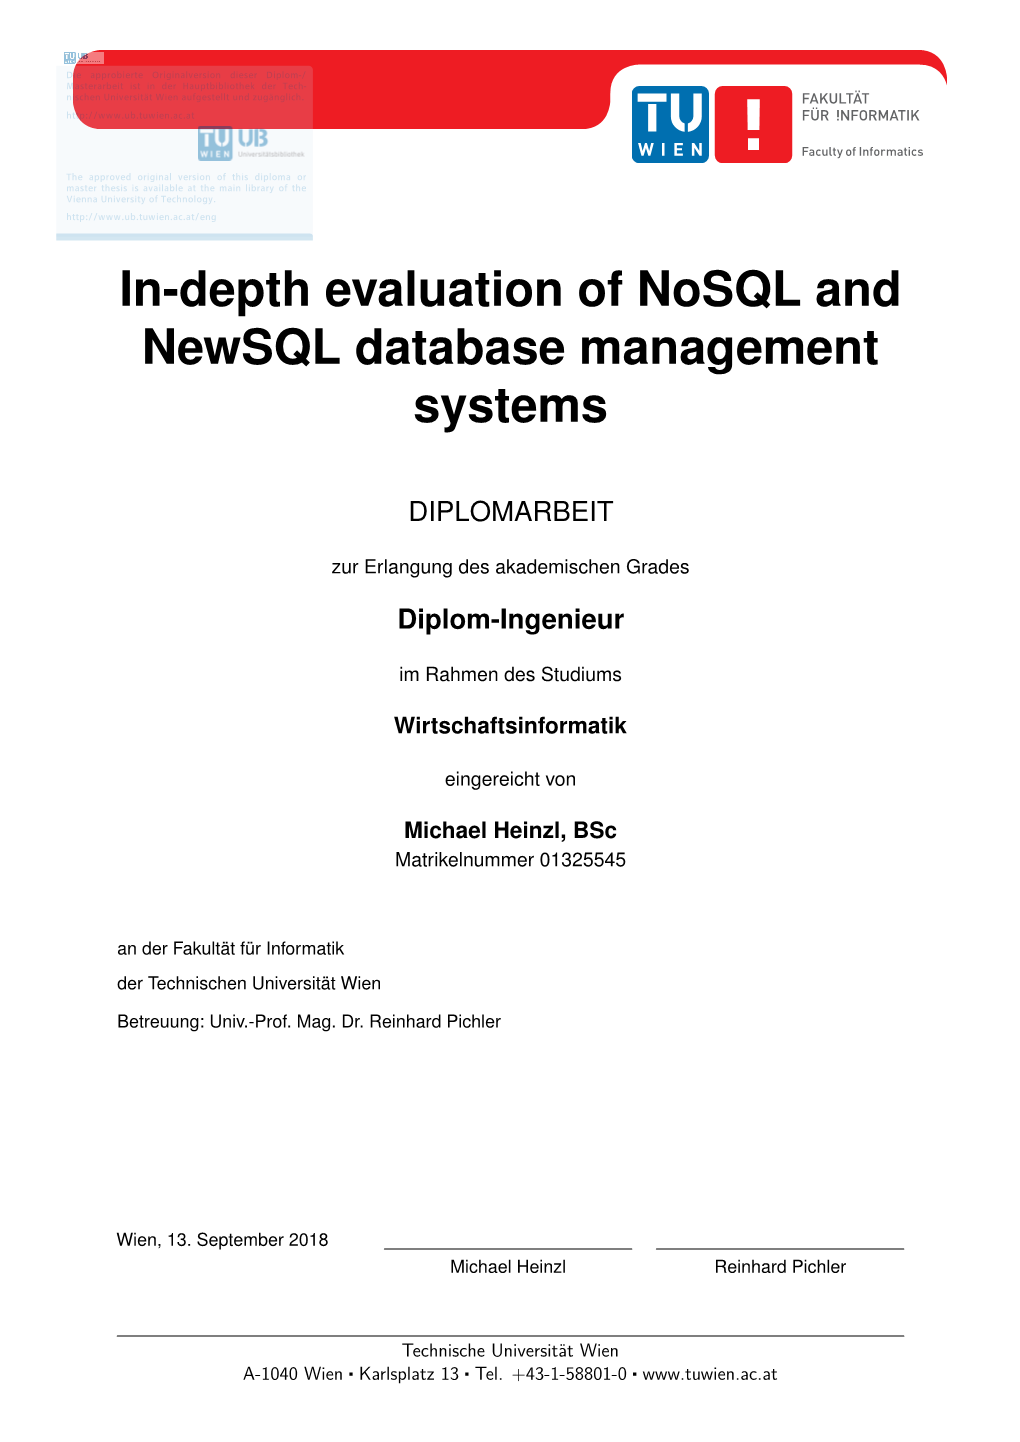 In-Depth Evaluation of Nosql and Newsql Database Management Systems